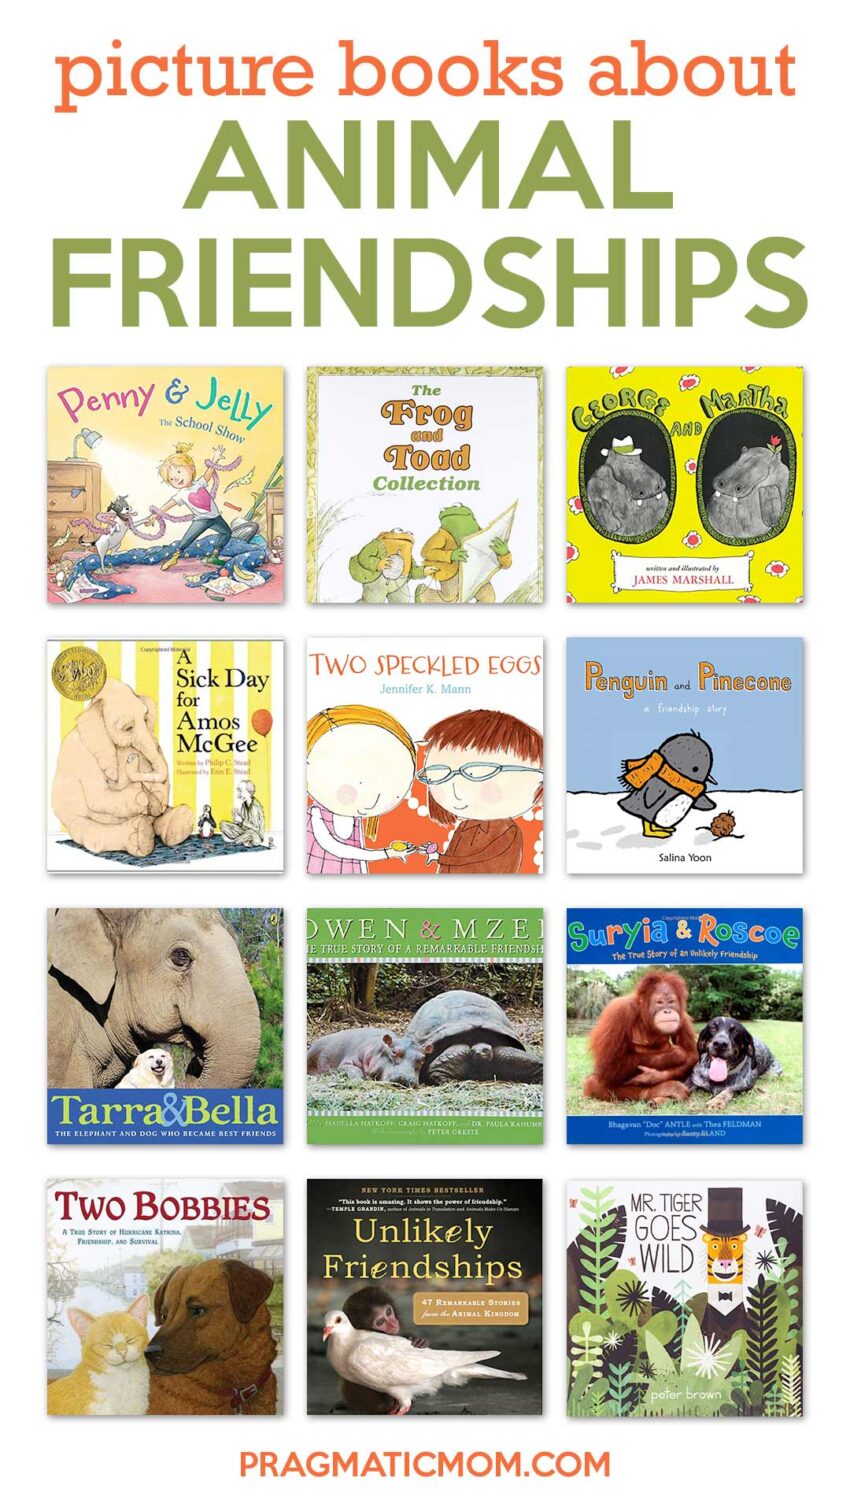 Picture Books About Animals and Friendship